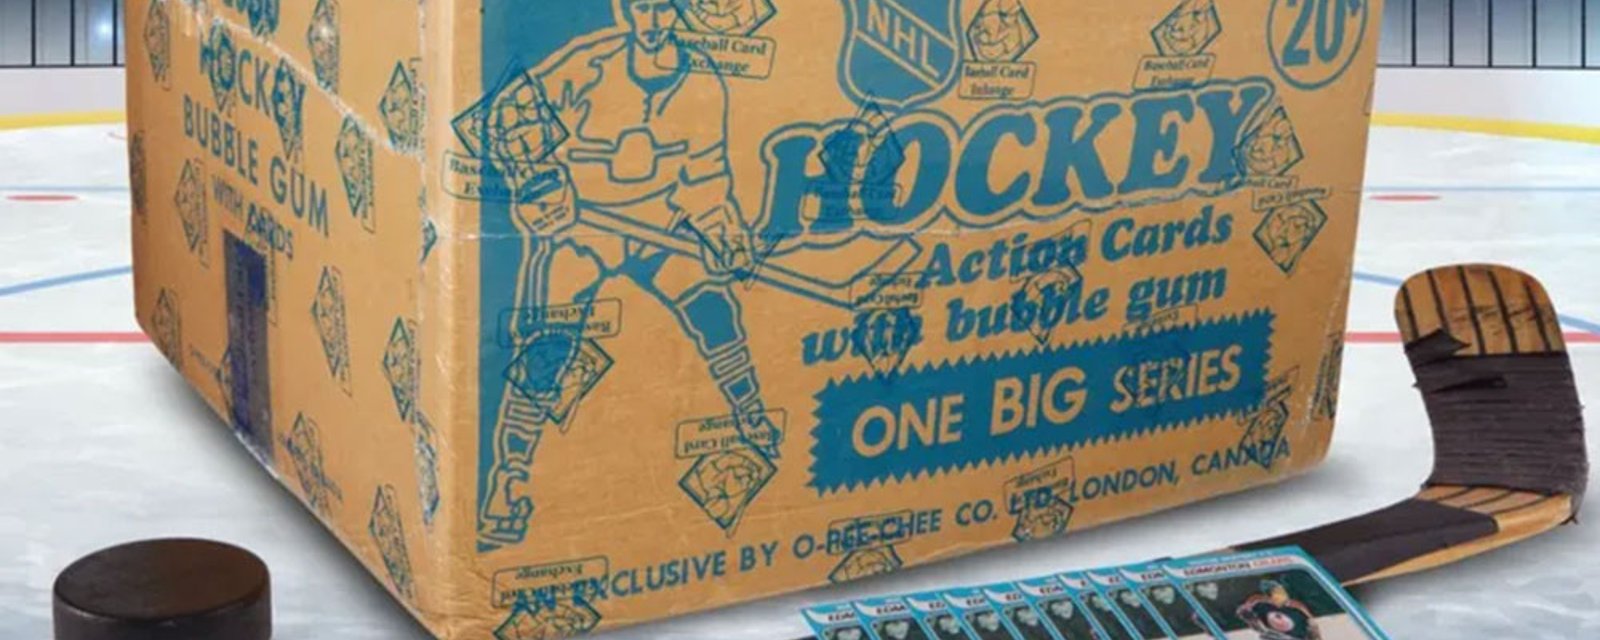 Sealed case of unopened NHL cards from 1979 sells for an insane amount at auction